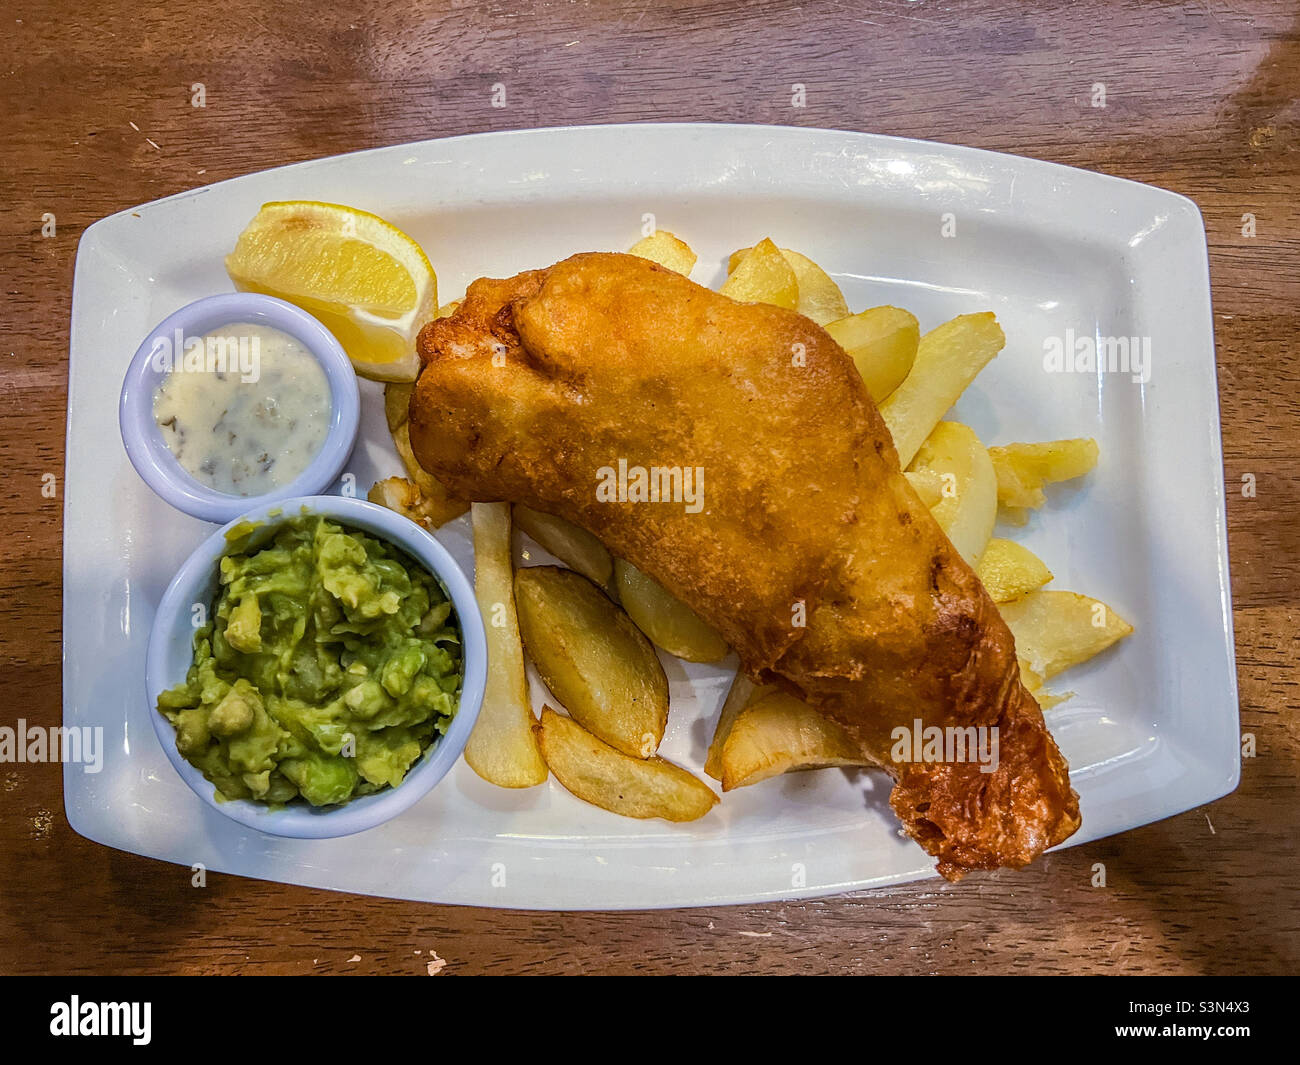 Fish and chips with mushy peas and tartare sauce Stock Photo